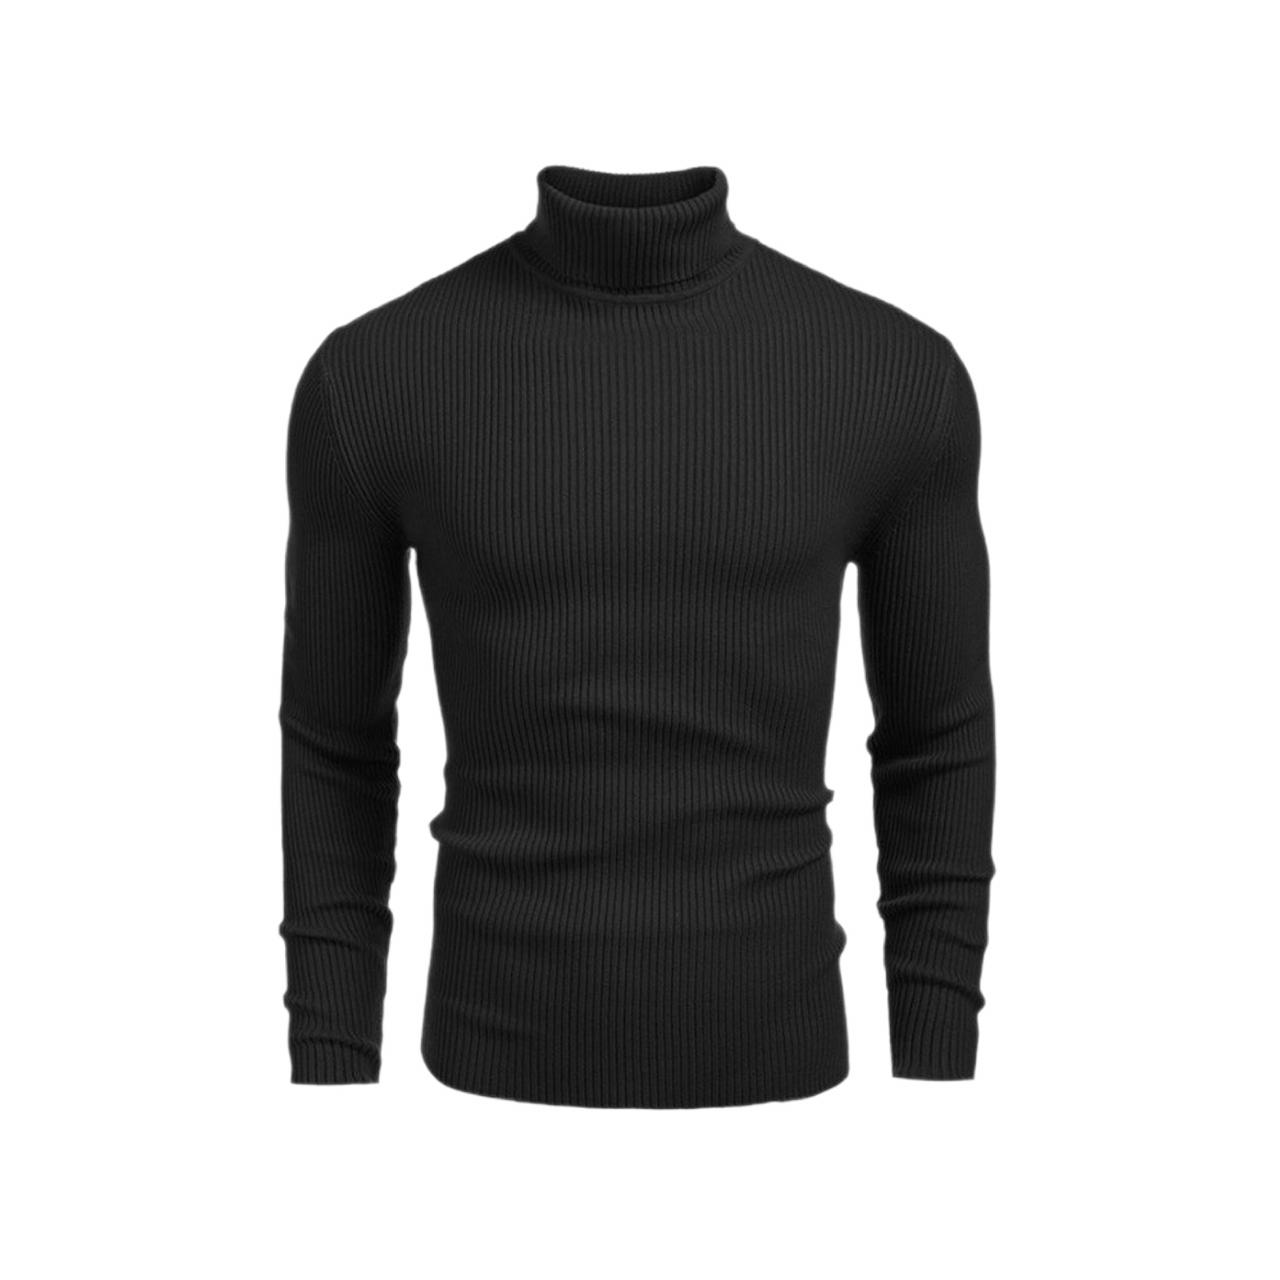 Black Turtle Neck – Outfit90s